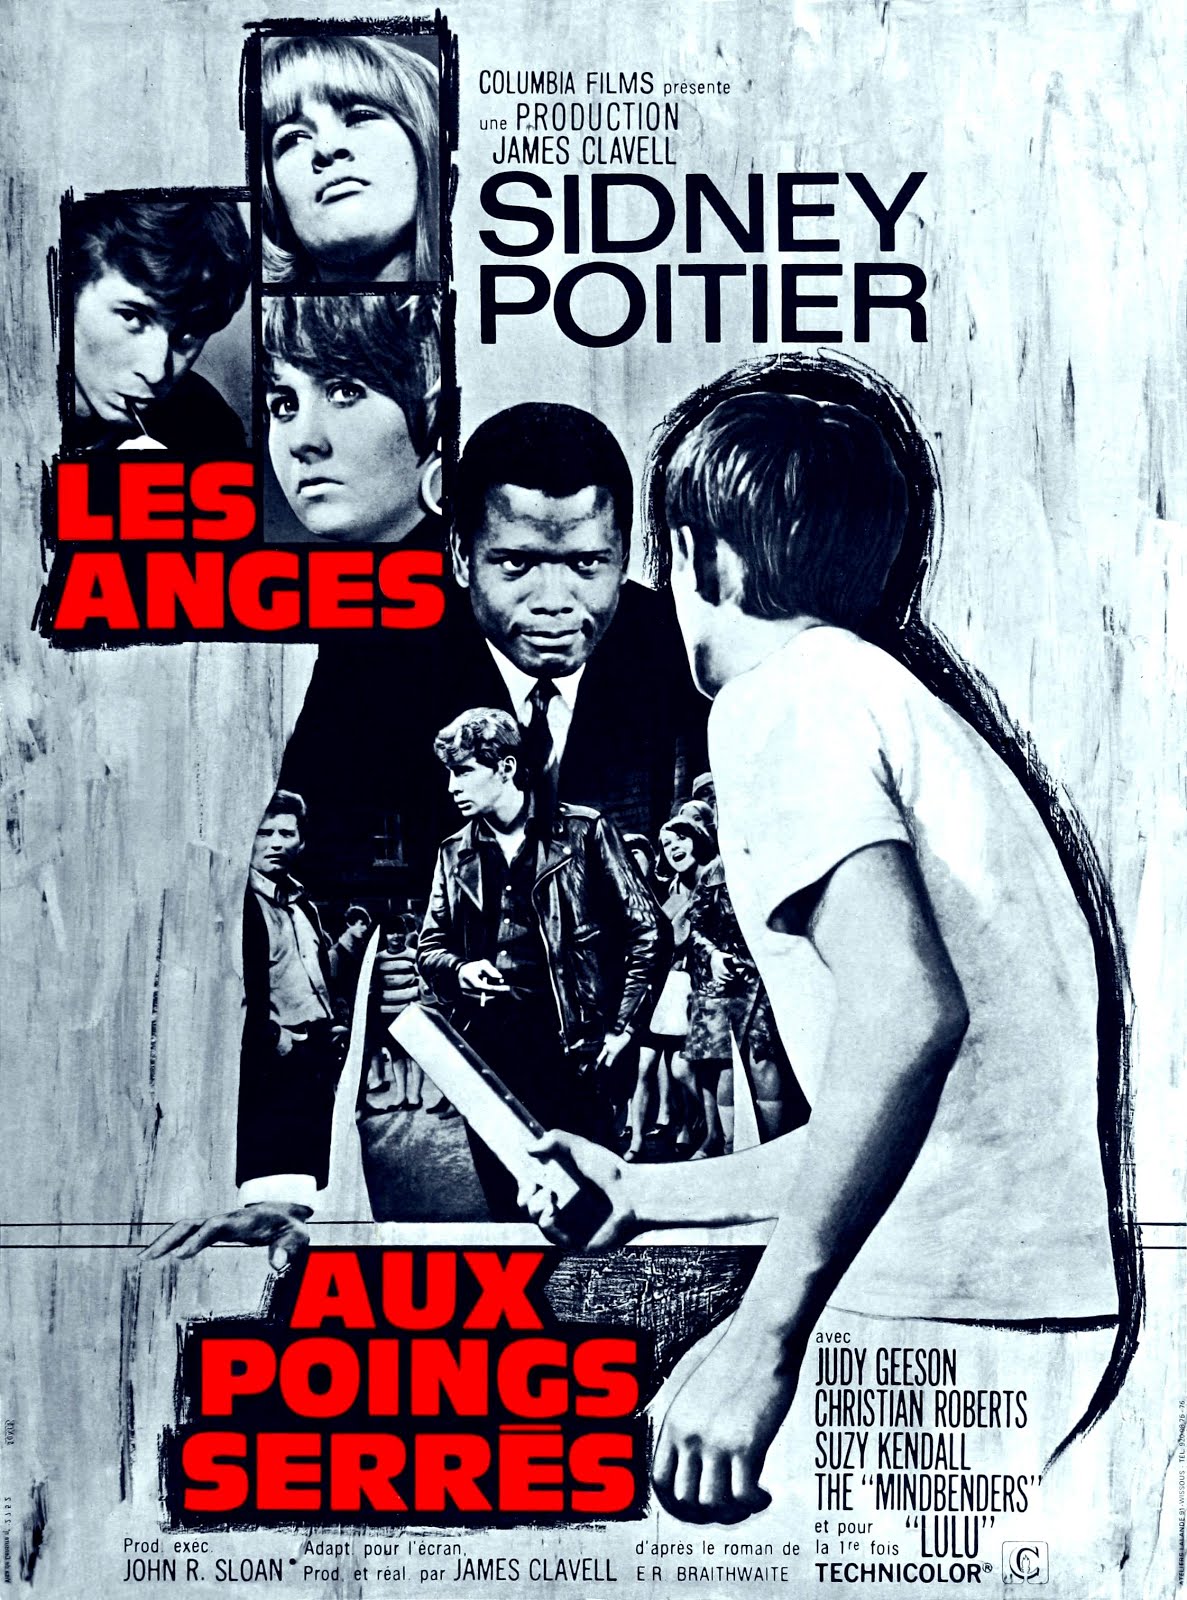 Les anges aux poings serrés (1966) James Clavell - To sir , with love (31.05.1966 / 1966)